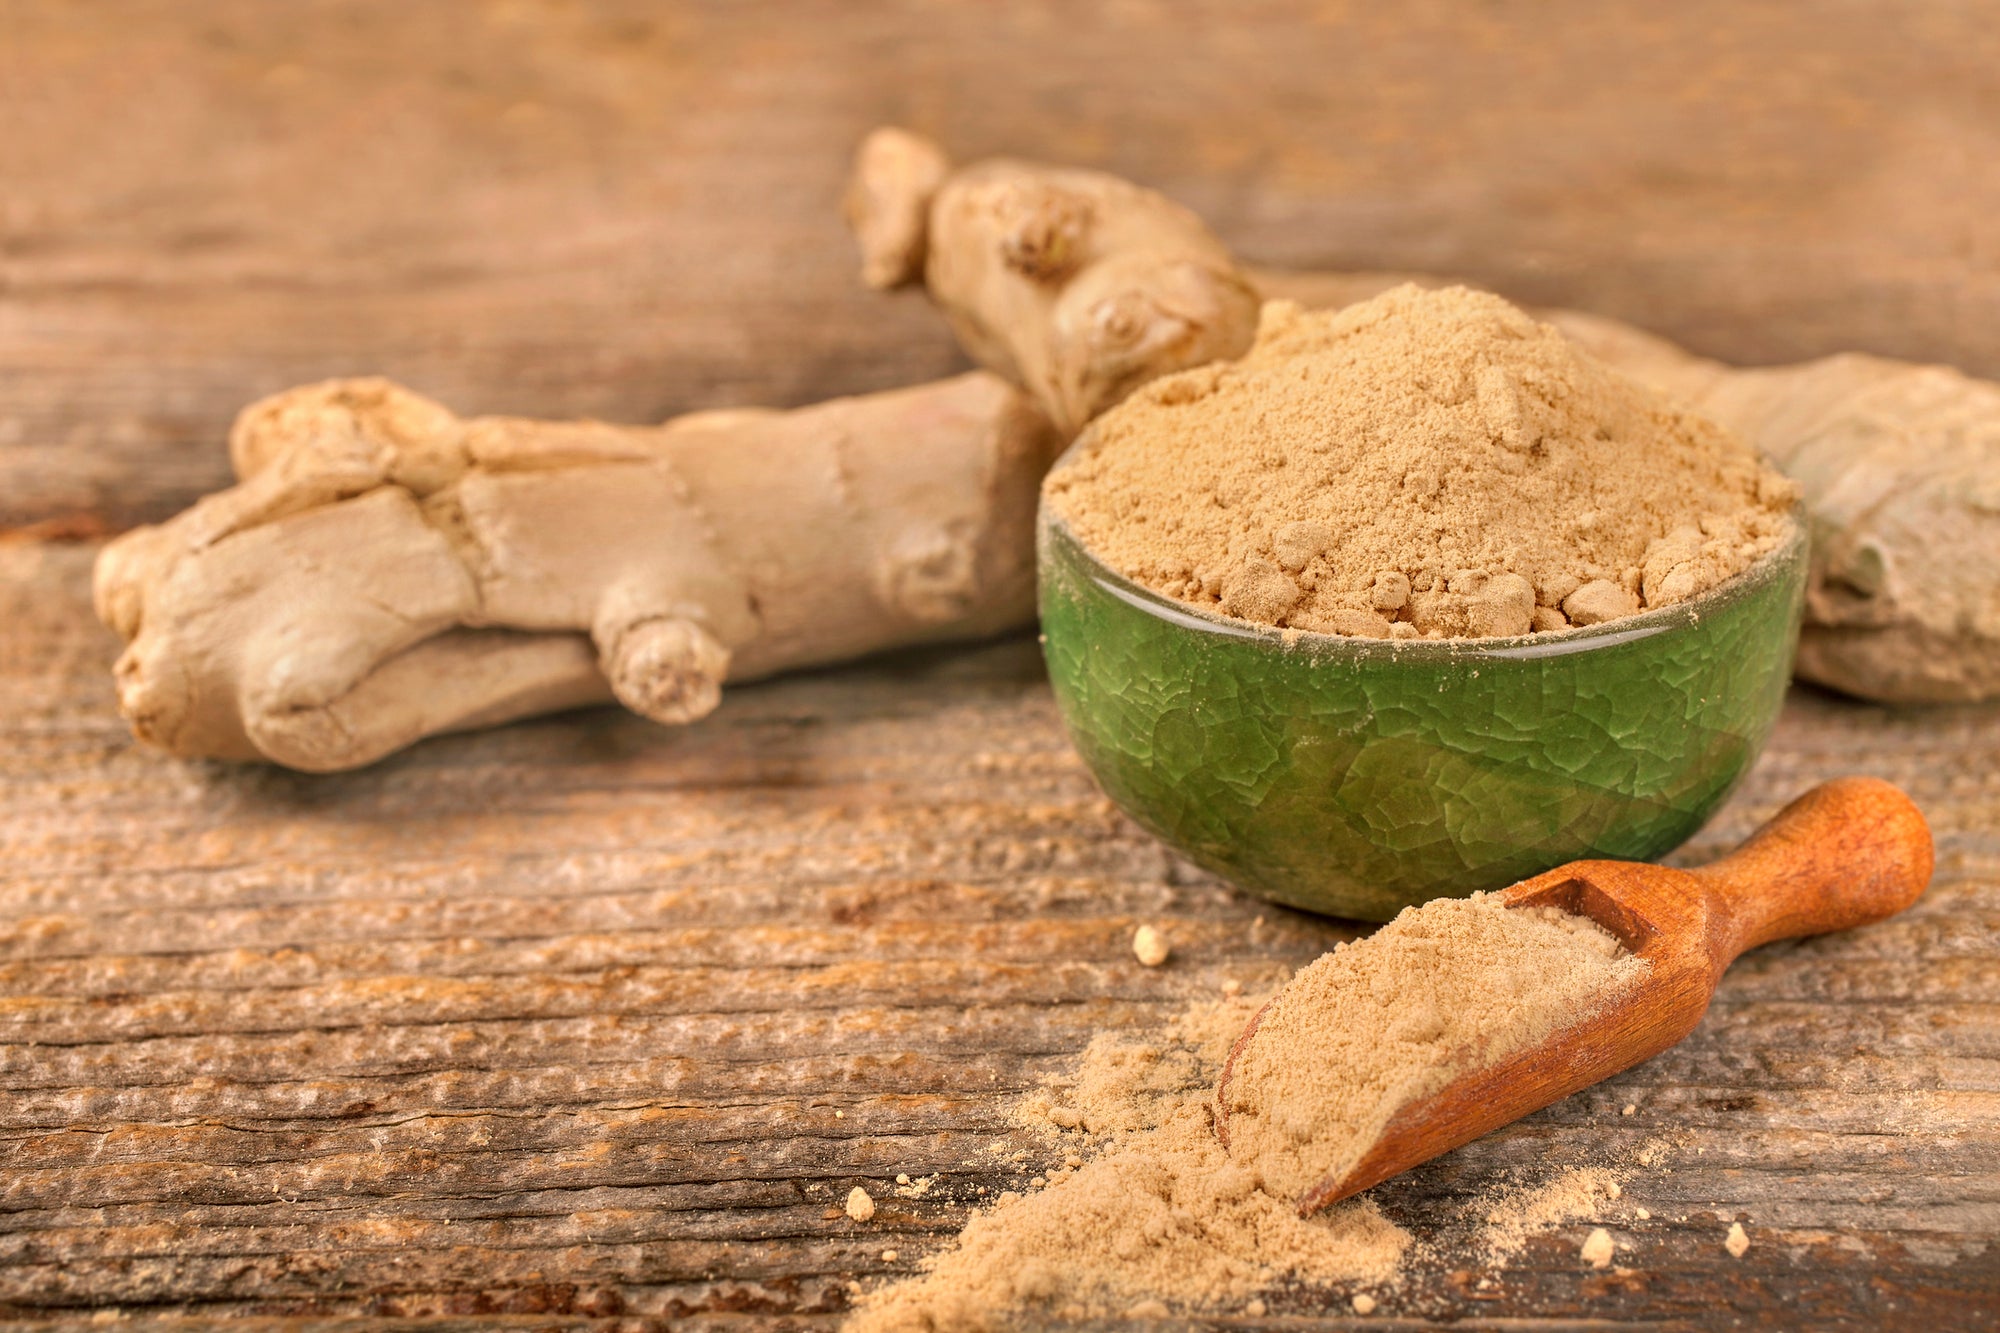 An image of ginger root powder in a bowl and wooden scoop and ginger root on a wooden table.